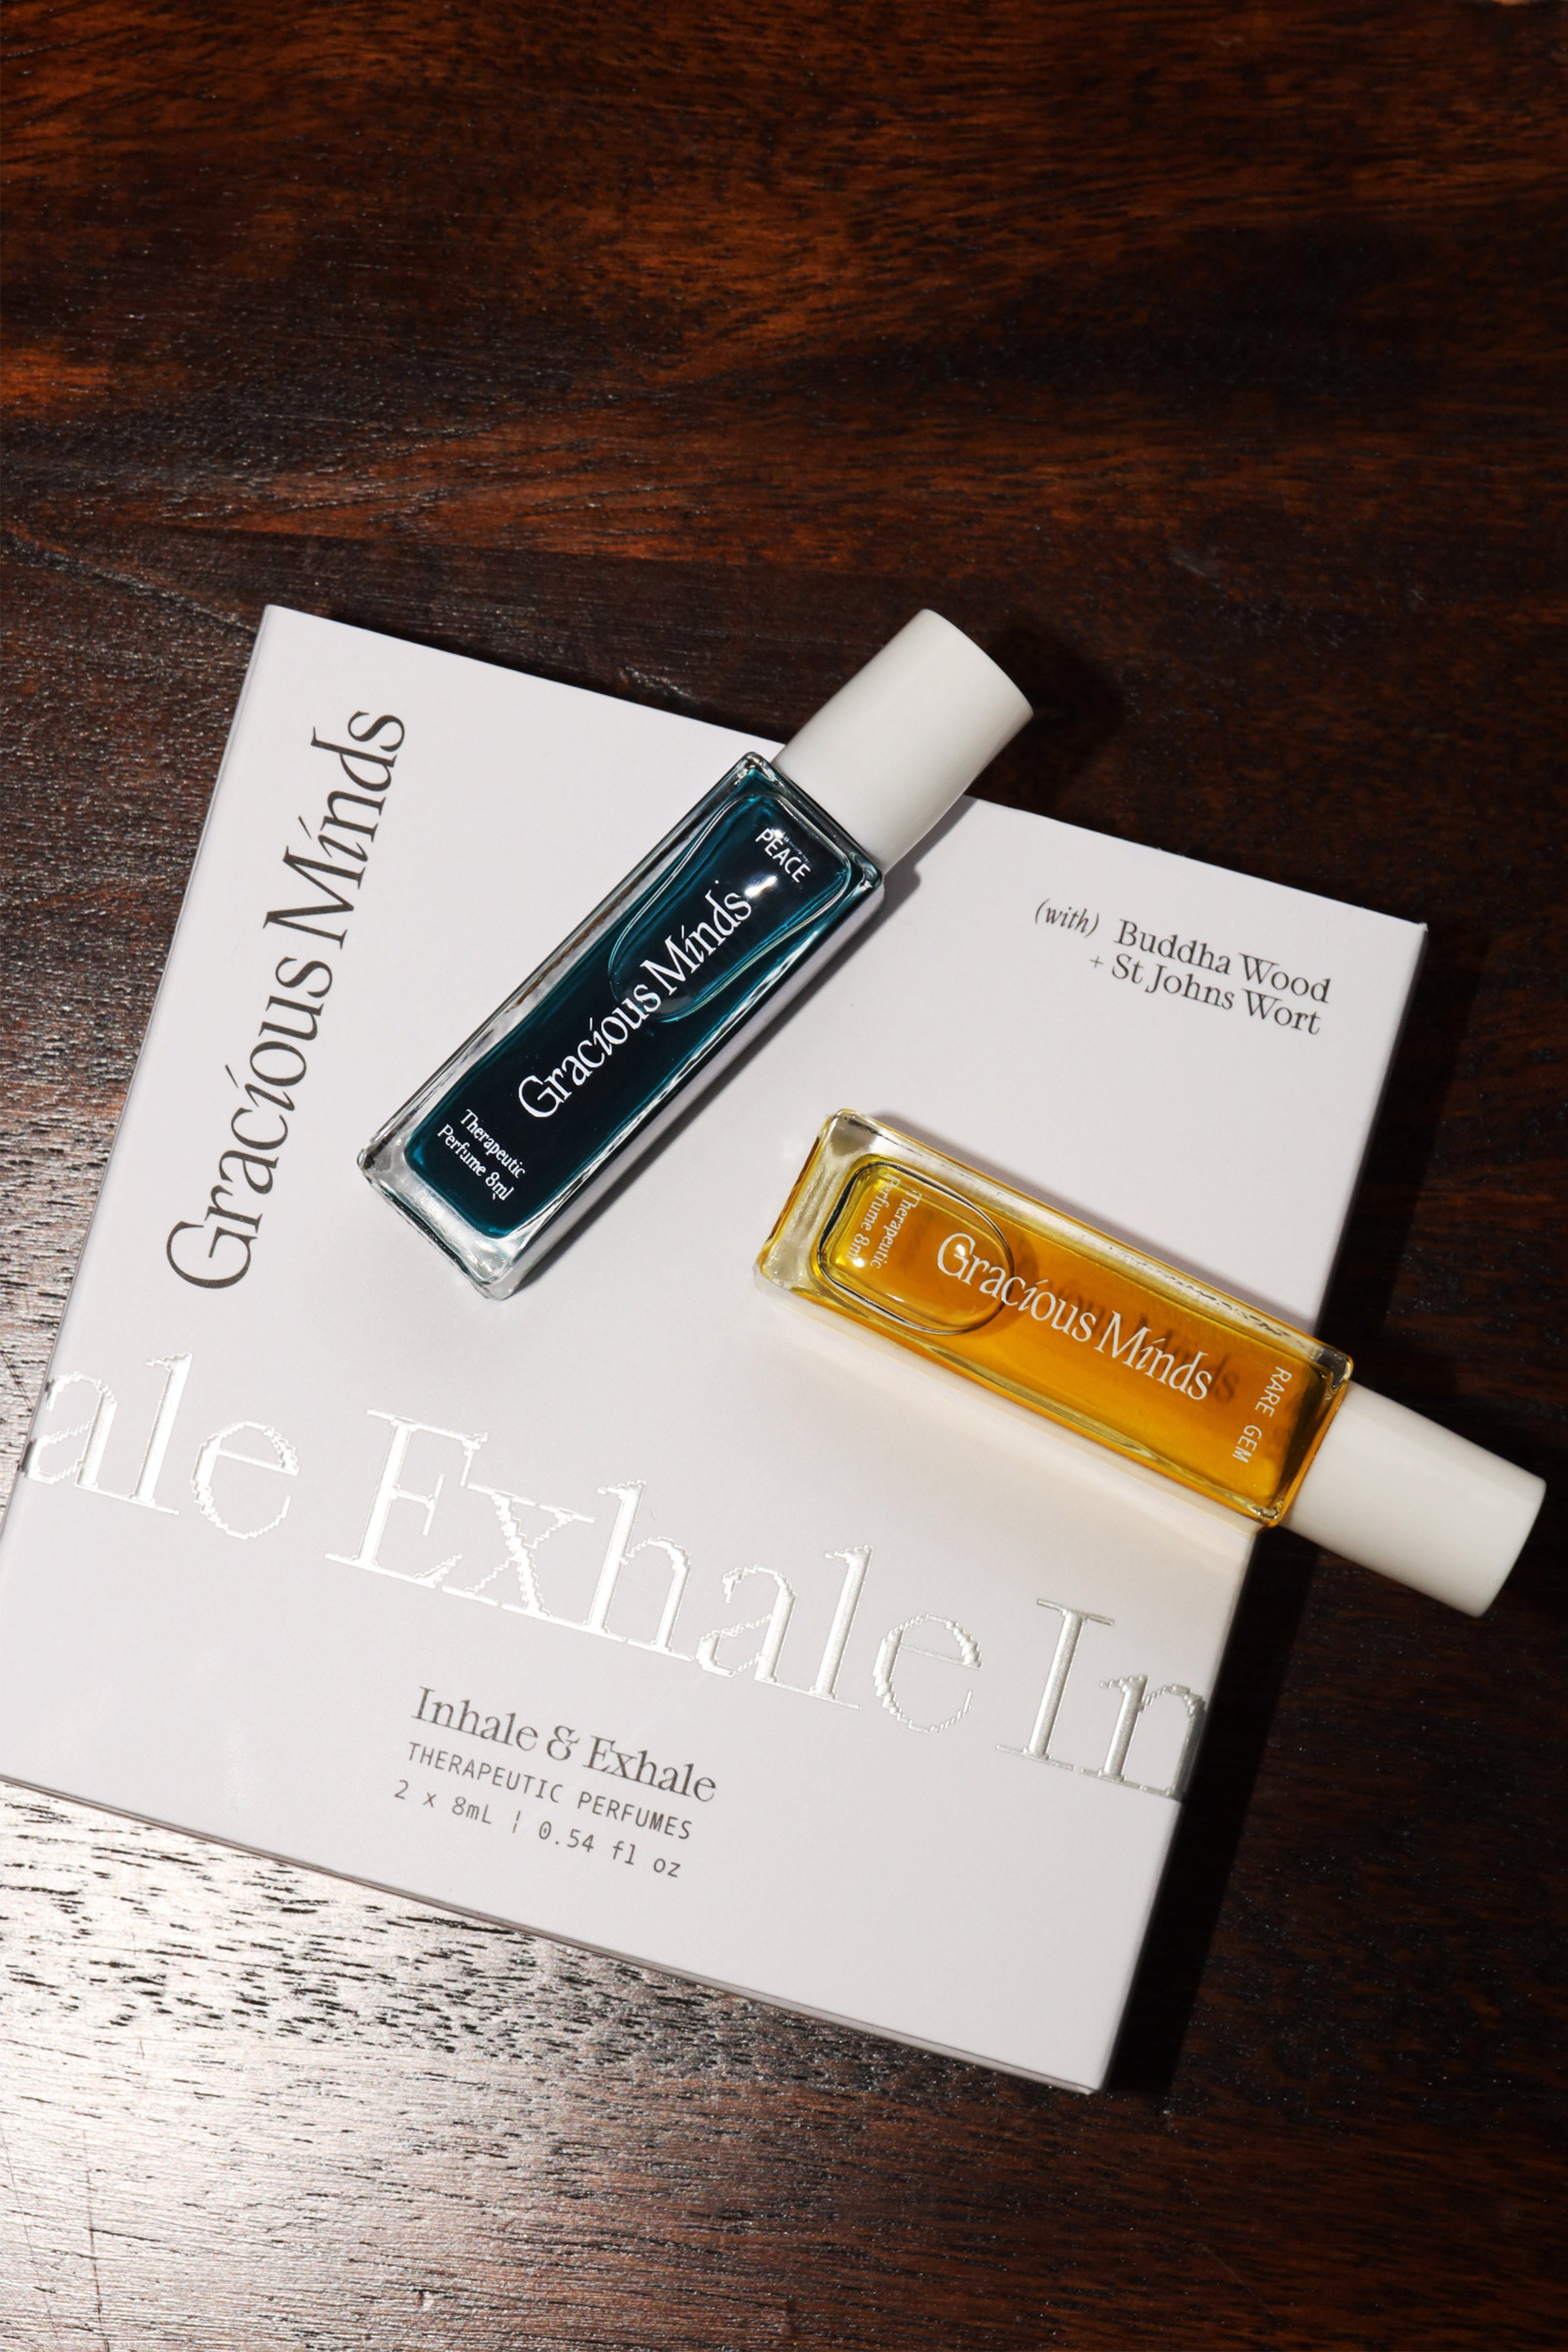 Inhale Exhale Therapeutic Perfume Set